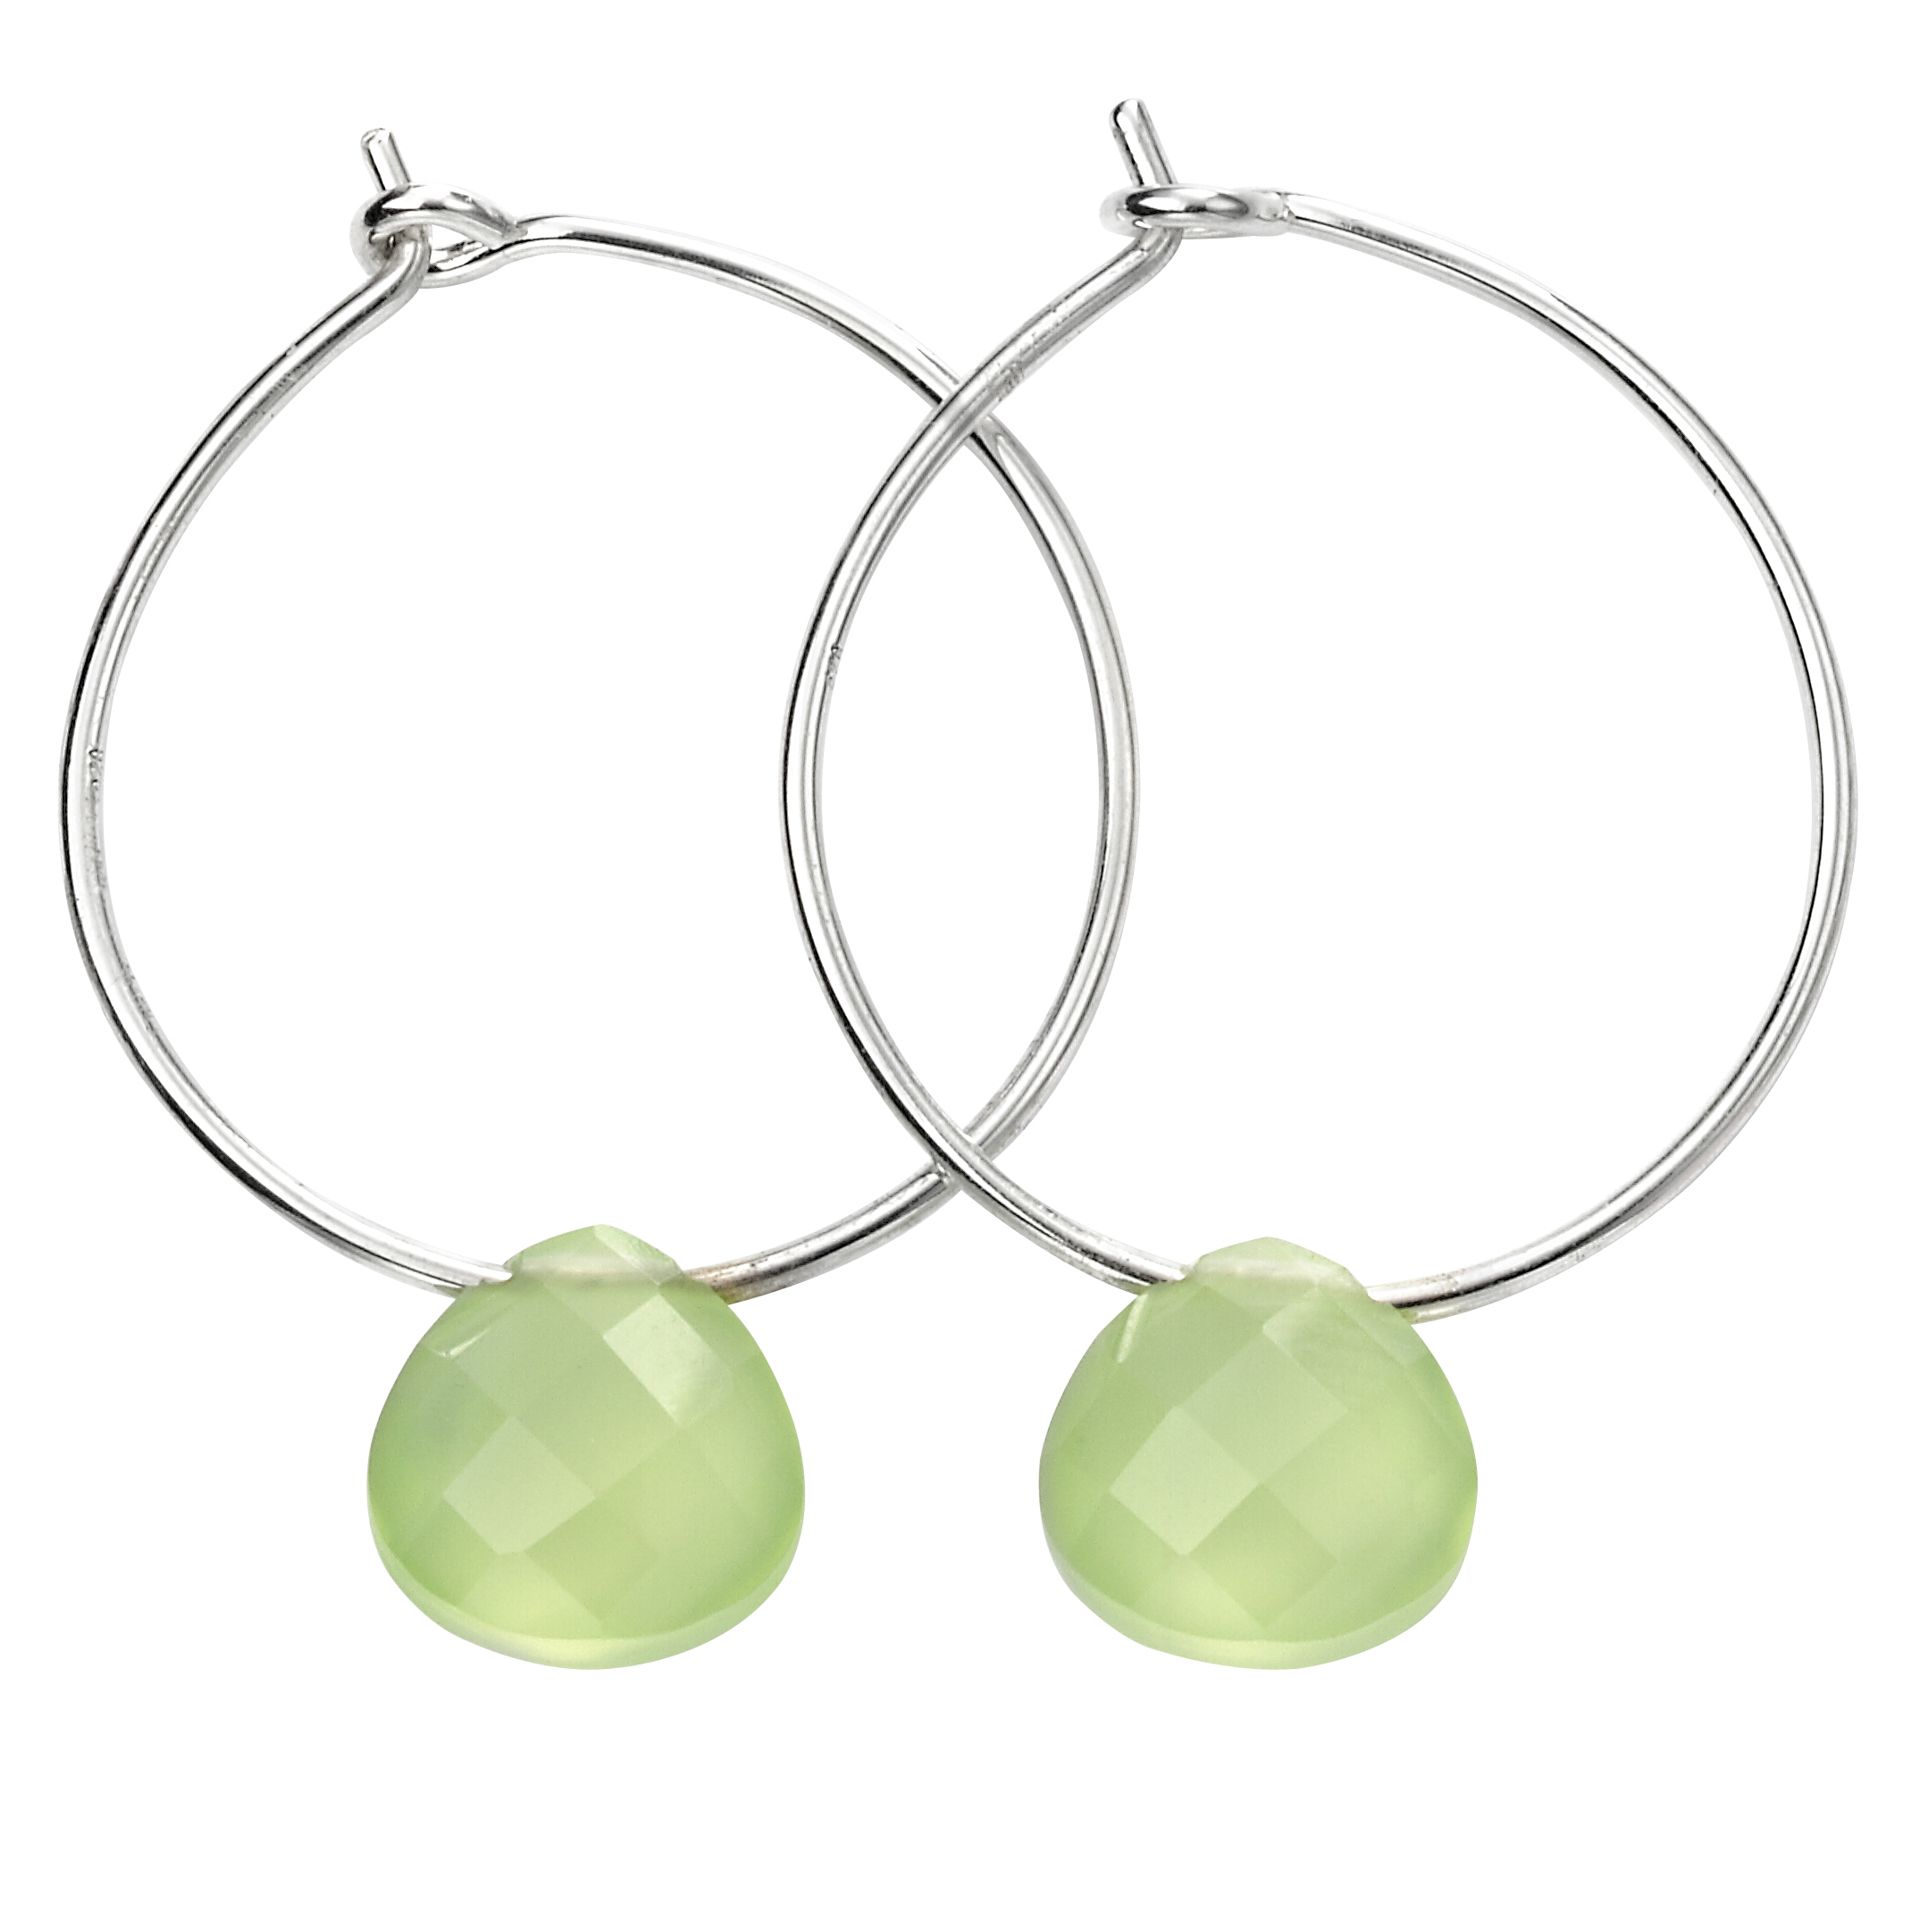 Beginnings 925 Sterling Silver Ladies' Silver Wire Hoop Earrings with Prenite Green Chalcedony Stone Charms<li>Design: Add a pop of colour to your jewellery collection this season with these stunning charm hoop earrings from Beginnings. Gorgeous shiny silver combined with stunning semi precious teardrop stone charms creates a colourful on-trend accessory perfect for all occasions from festivals to Summer holidays. Wear alone or team up with our coordinating necklaces to complete the look.<li>Composition: Crafted from genuine 925 sterling silver with a highly polished finish. Visible 925 hallmark stamp can be found on the side of the earring hook. Features 1 prenite green chalcedony stone per hoop of size 10mm.<li>Dimensions: height 36.5mm, width 25.3mm stone width 10mm, depth of hoop 1mm stone depth 5.5mm, weight 2.2g, stone weight 1.1g anti tarnish plated<li>Fitting: These earrings feature a huggy hoop creole style fitting suitable for pierced ears only<li>Storage: This item includes a padded black gift box to present the jewellery in. This is ideal for gifting and a great place to store the item safely for future wear.